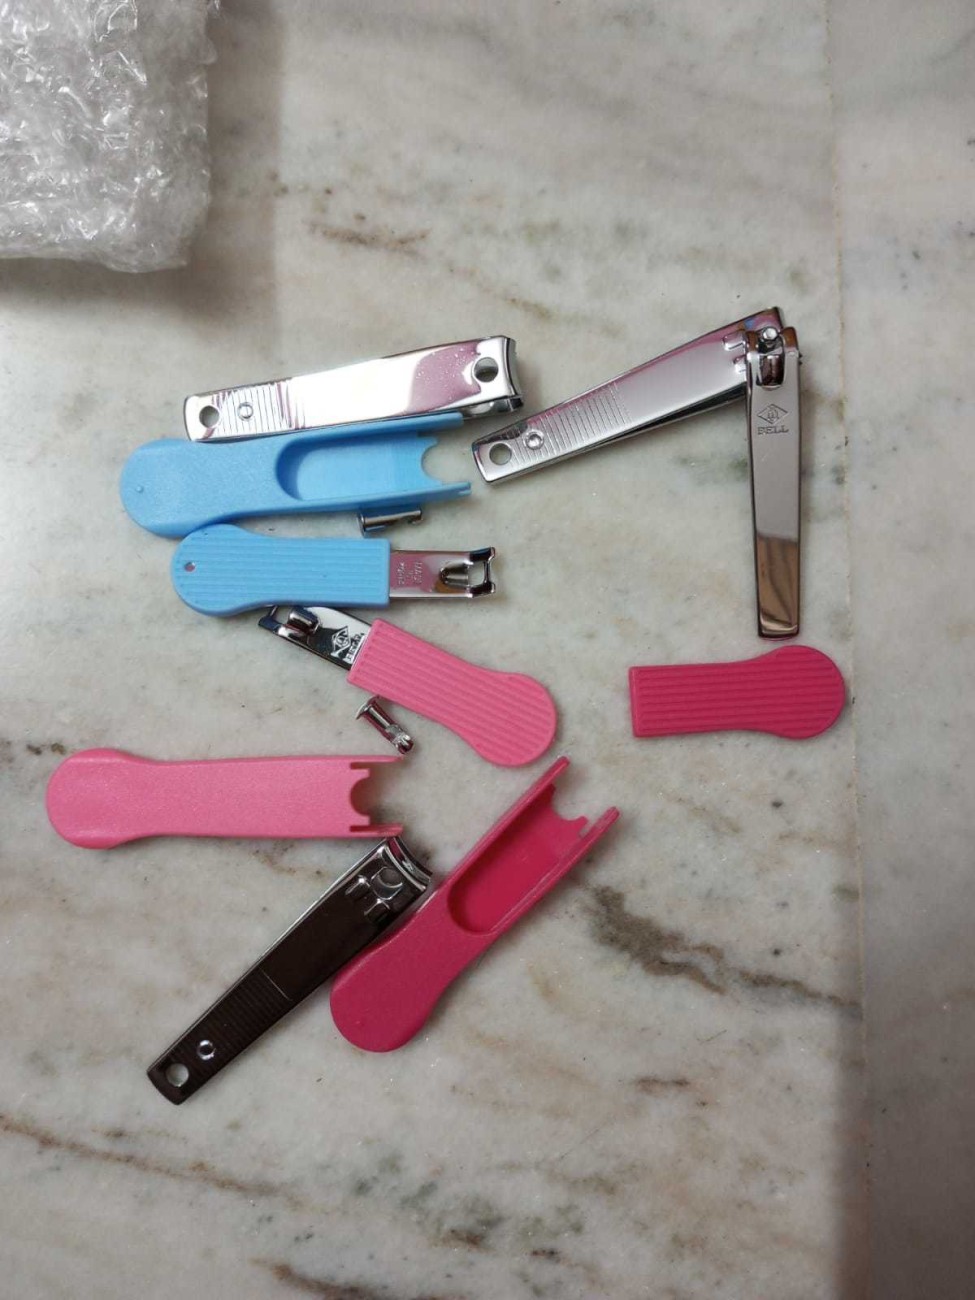 777 Three Seven Silver Nail Clippers 8 Pieces Beauty Set TS-636C Made in  Korea | eBay